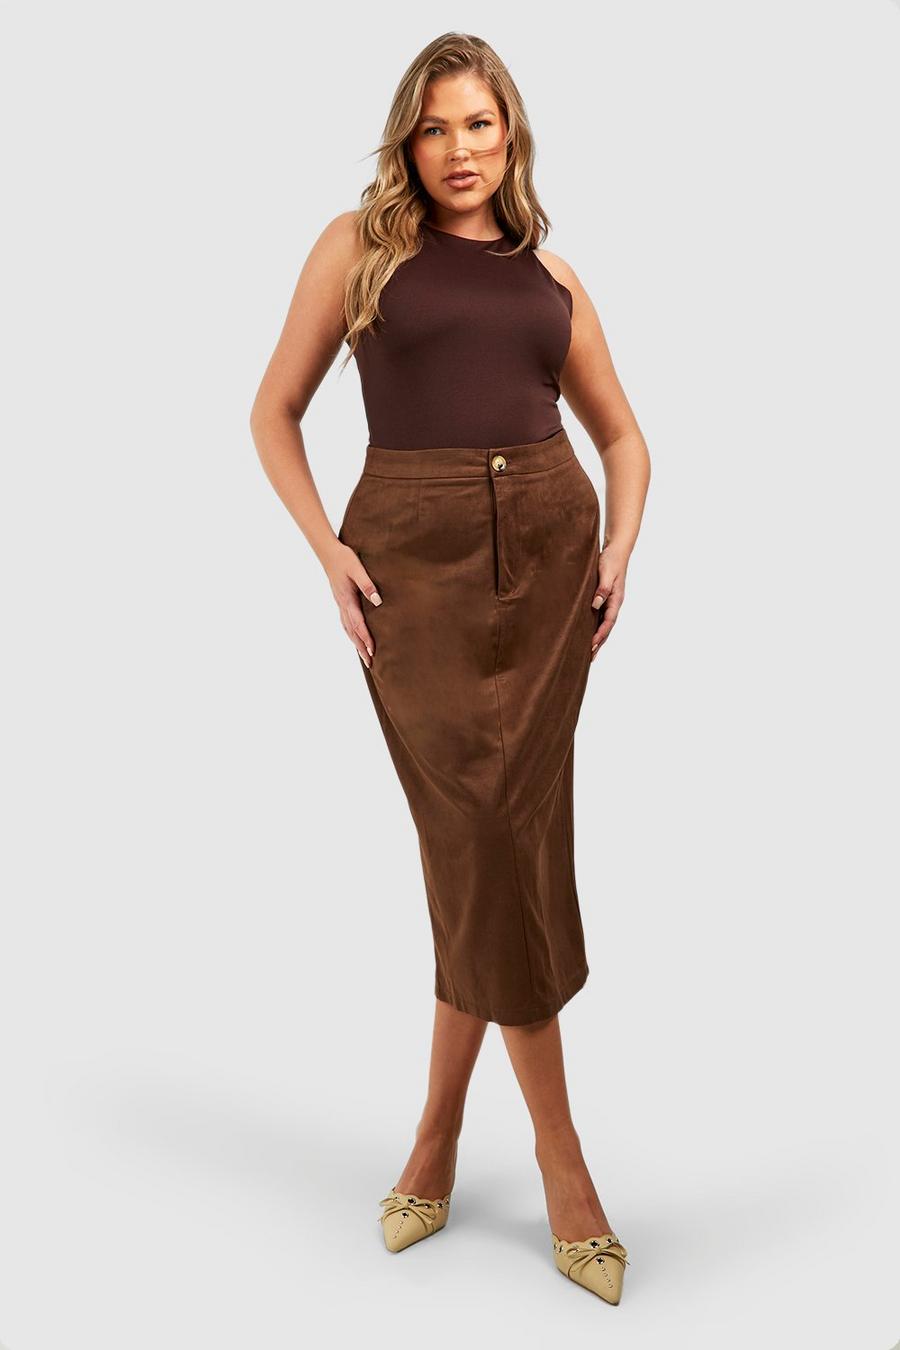 Gonna longuette Plus Size in suedette, Chocolate